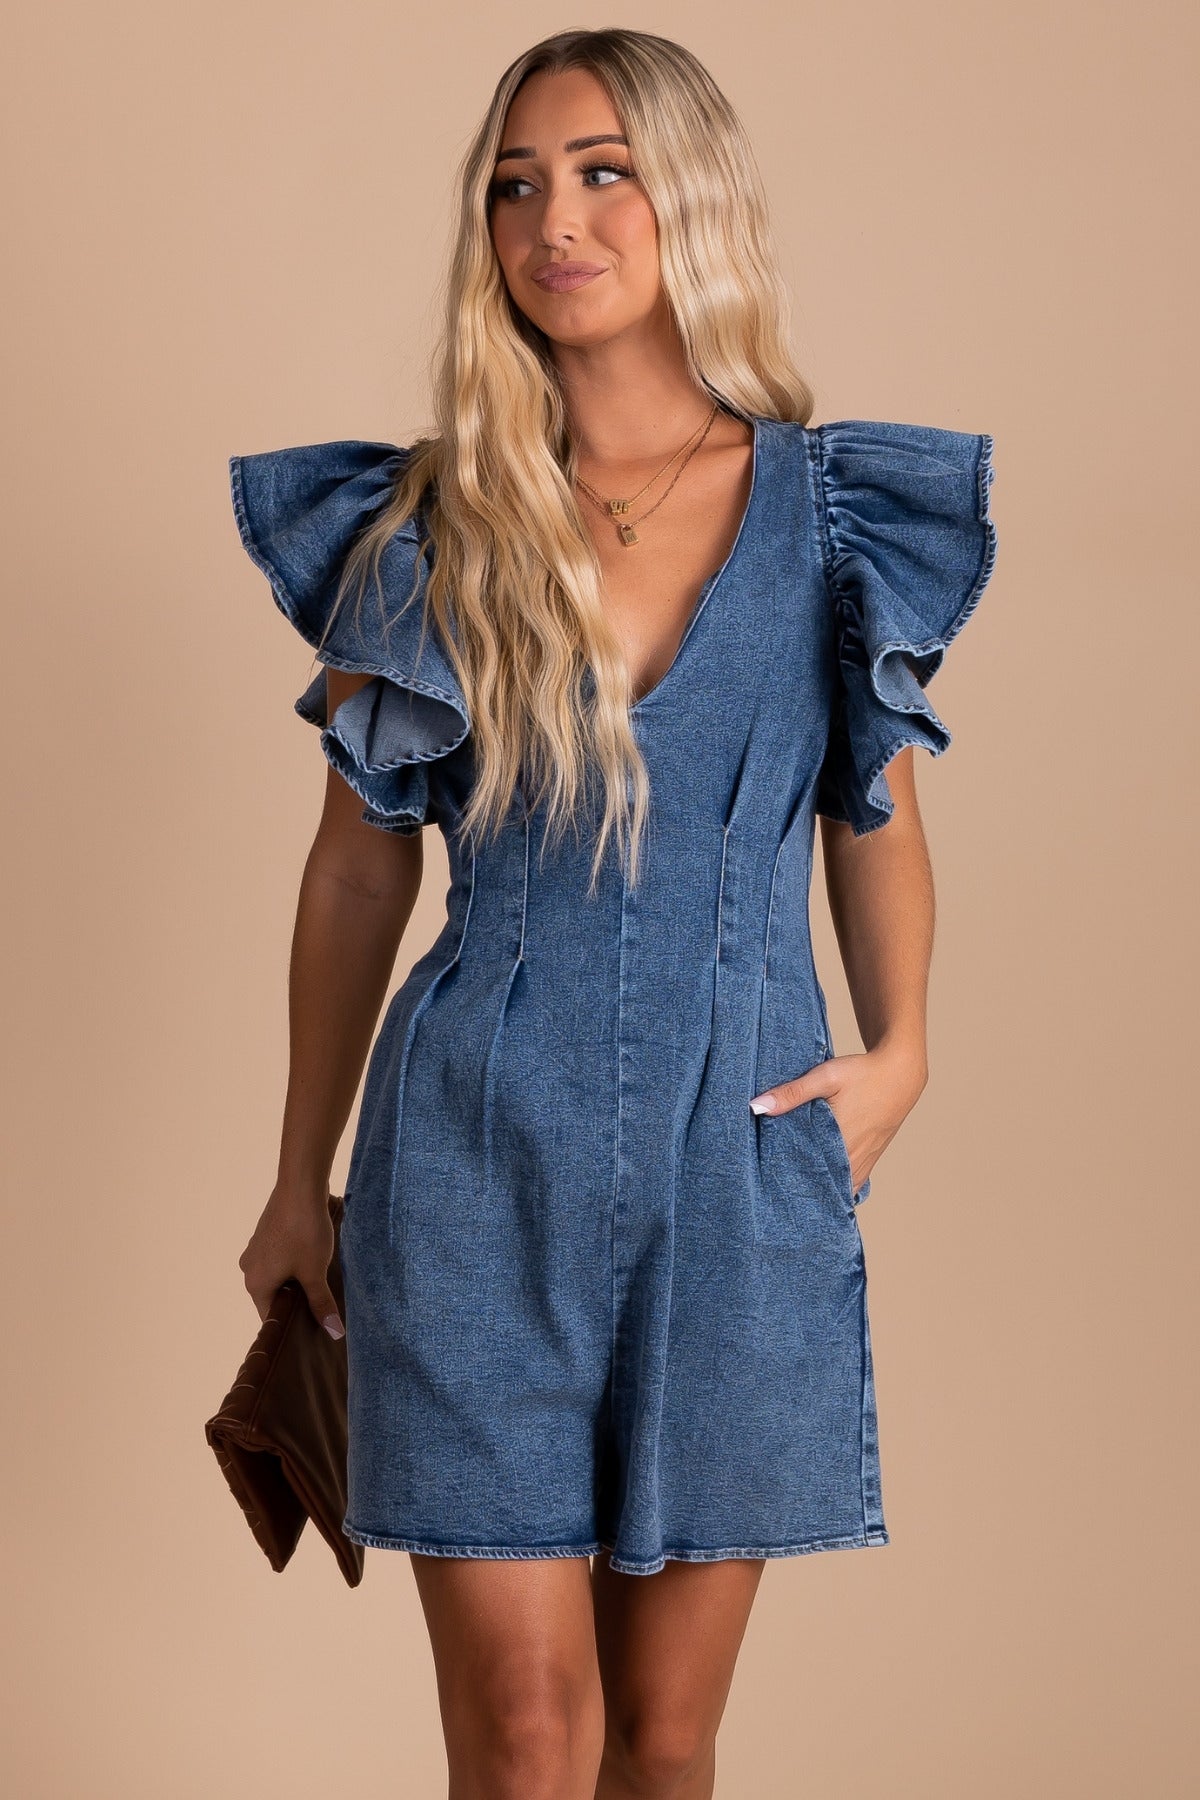 Jeans Casual Overalls Sexy Women Turn Down Collar Elegant Blue Denim  Jumpsuit Romper - Rompers&playsuits - AliExpress